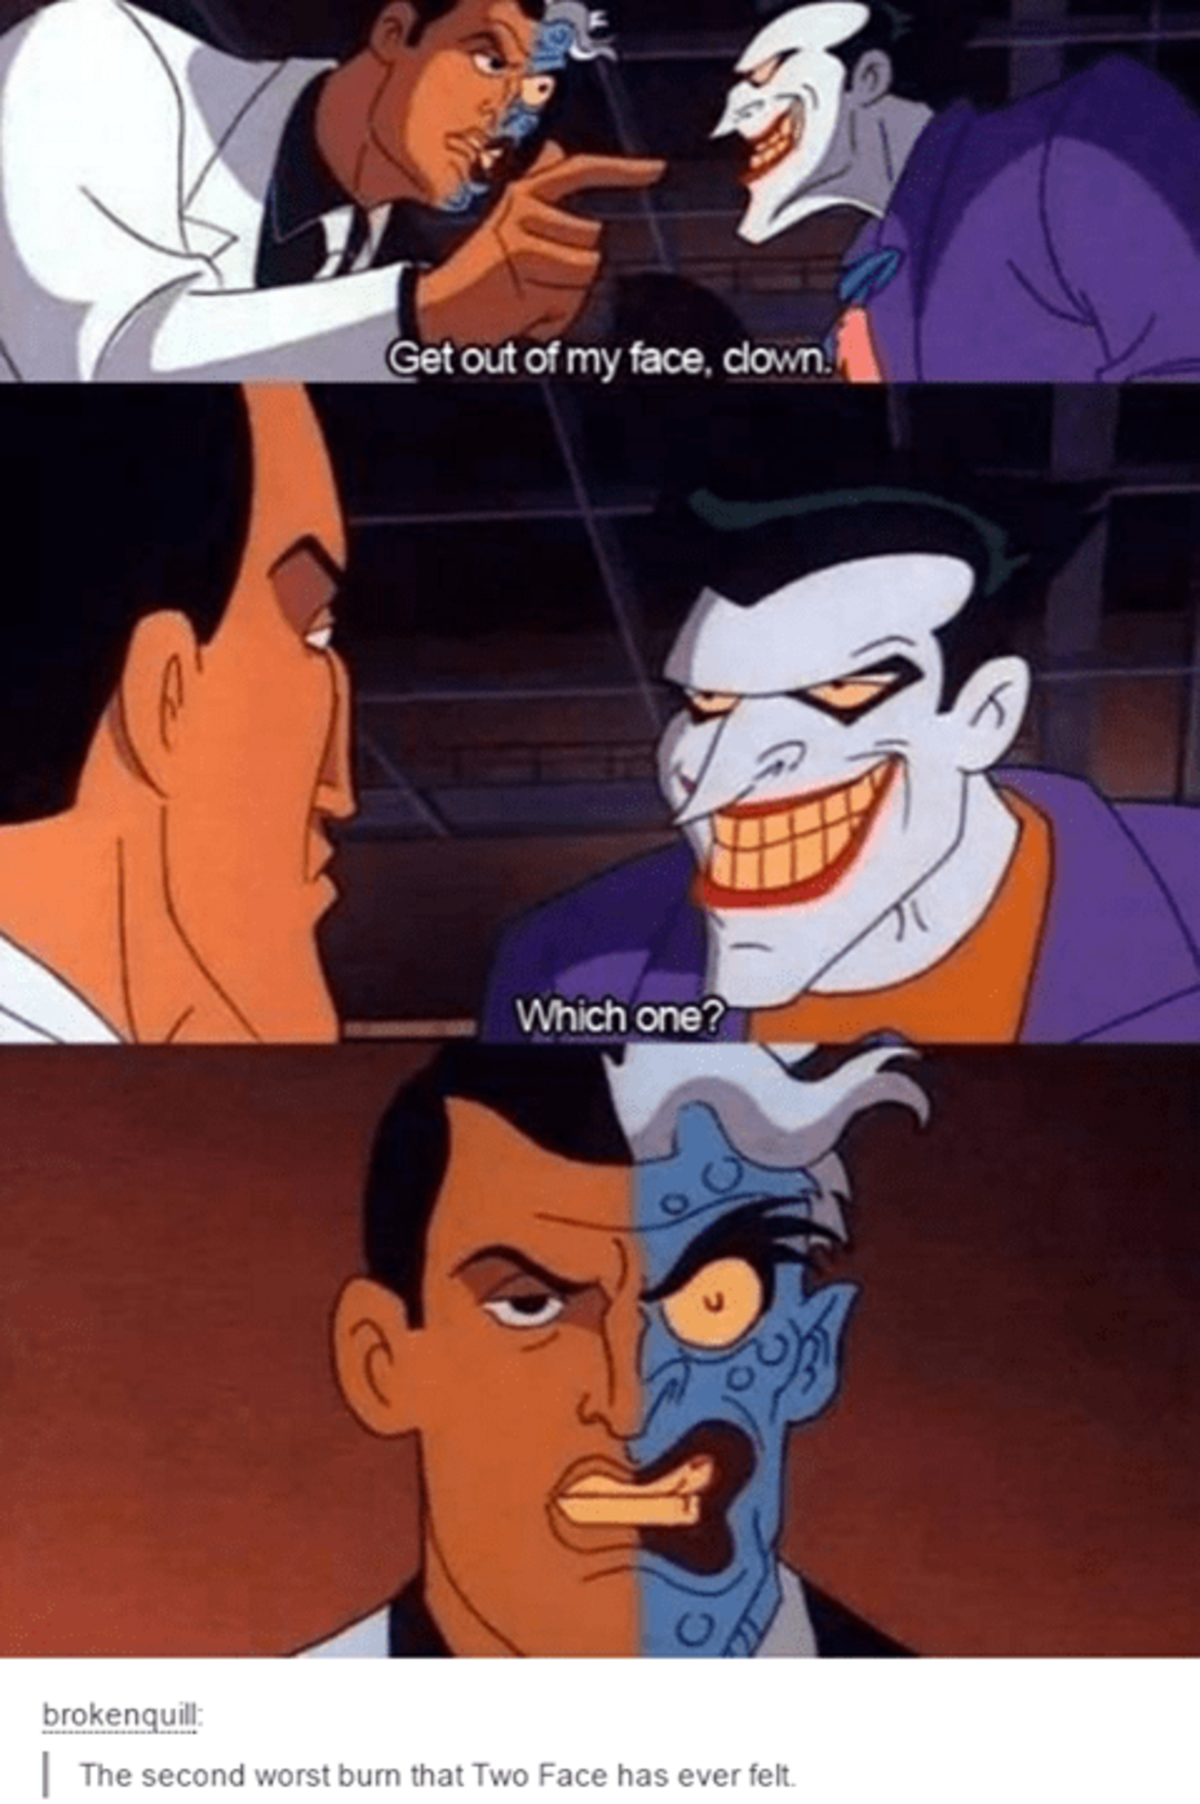 Joker Burn. .. Ah yes, the supervillain that refers to himself as &quot;Two Face&quot; is going to feel very offended by the implication that he has two faces.